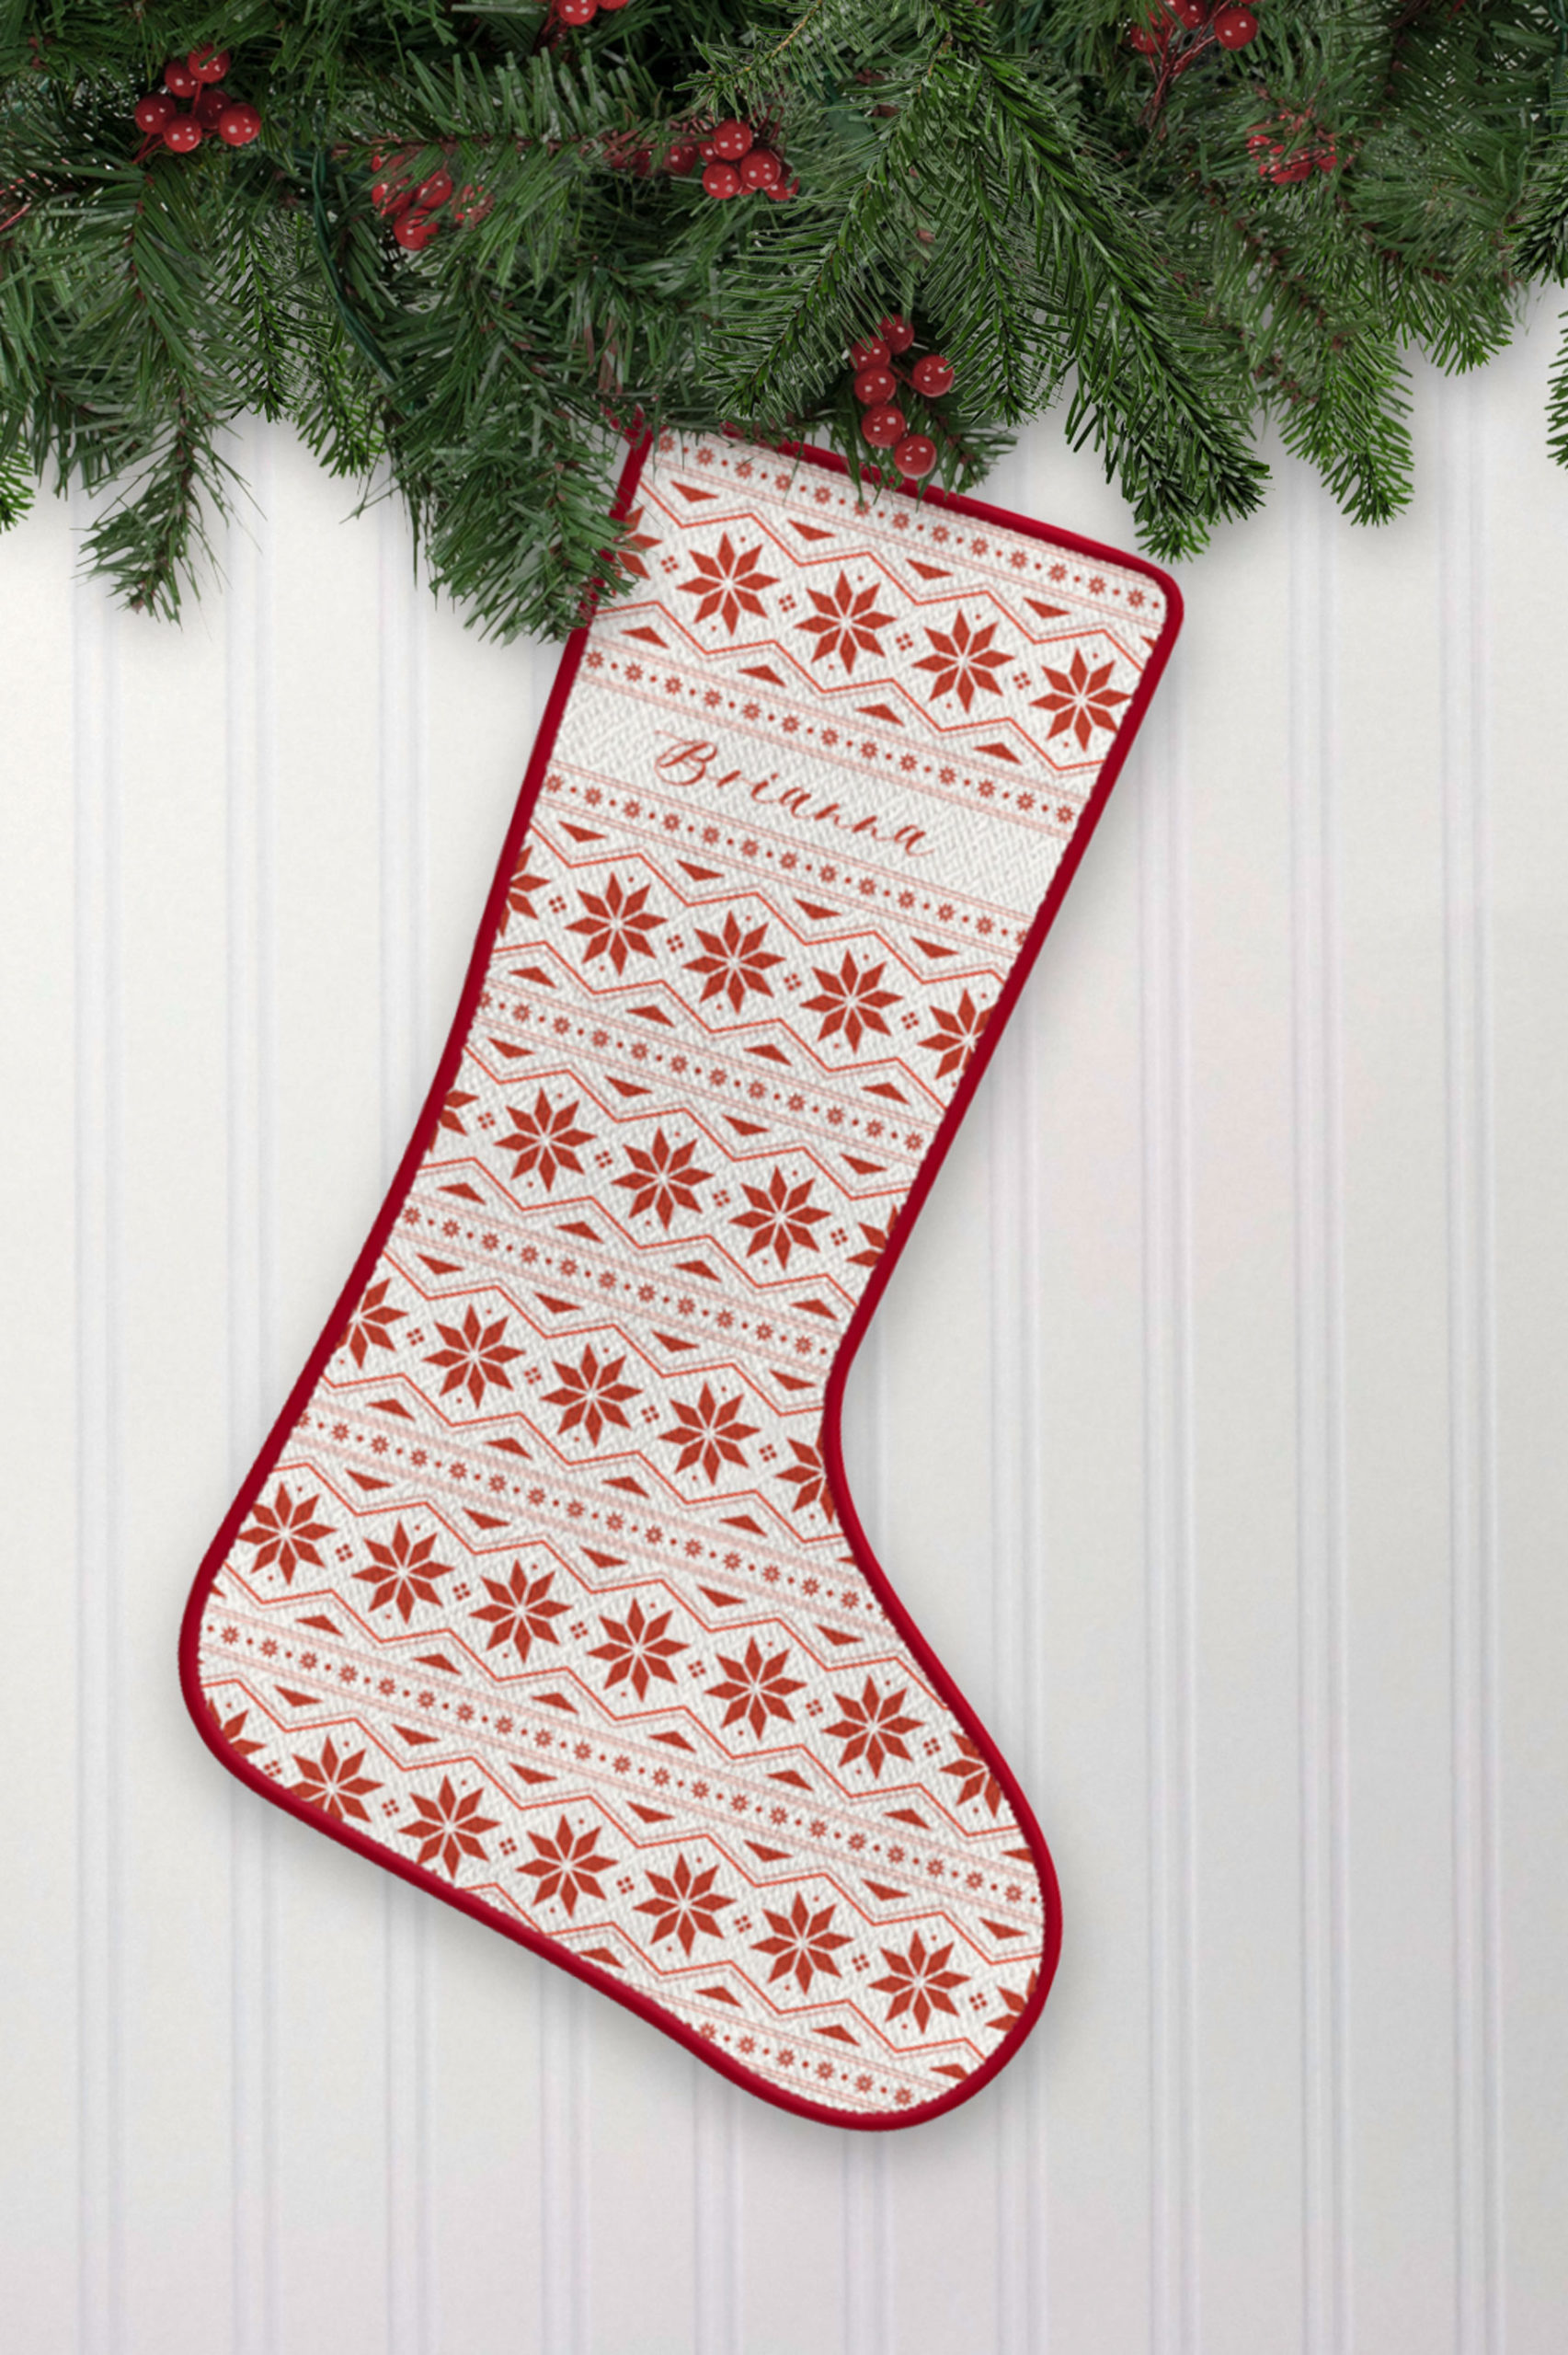 Personalized Nordic pattern Christmas stocking